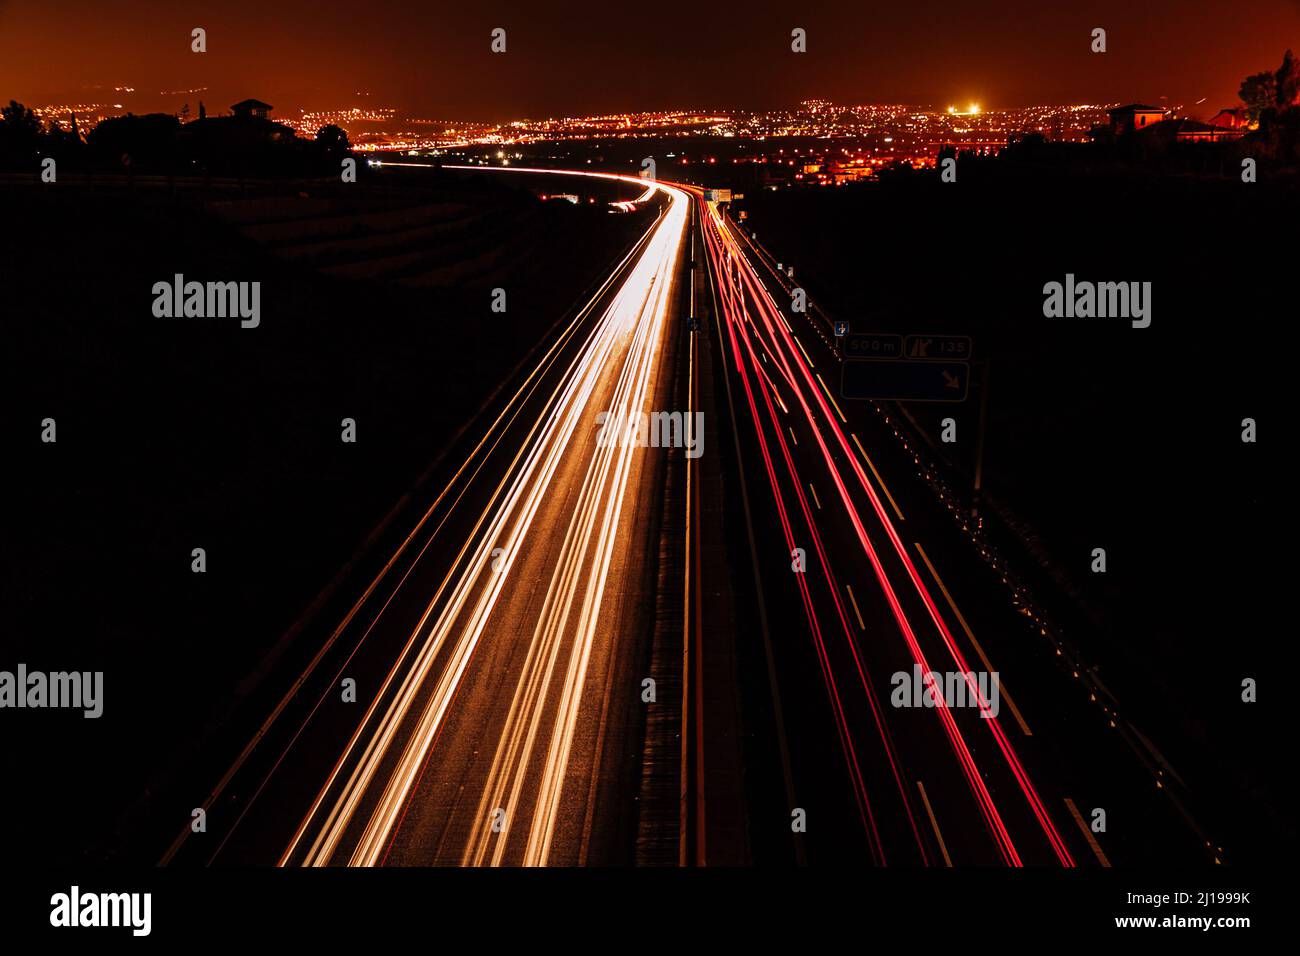 car trails on a road at dusk. Stock Photo